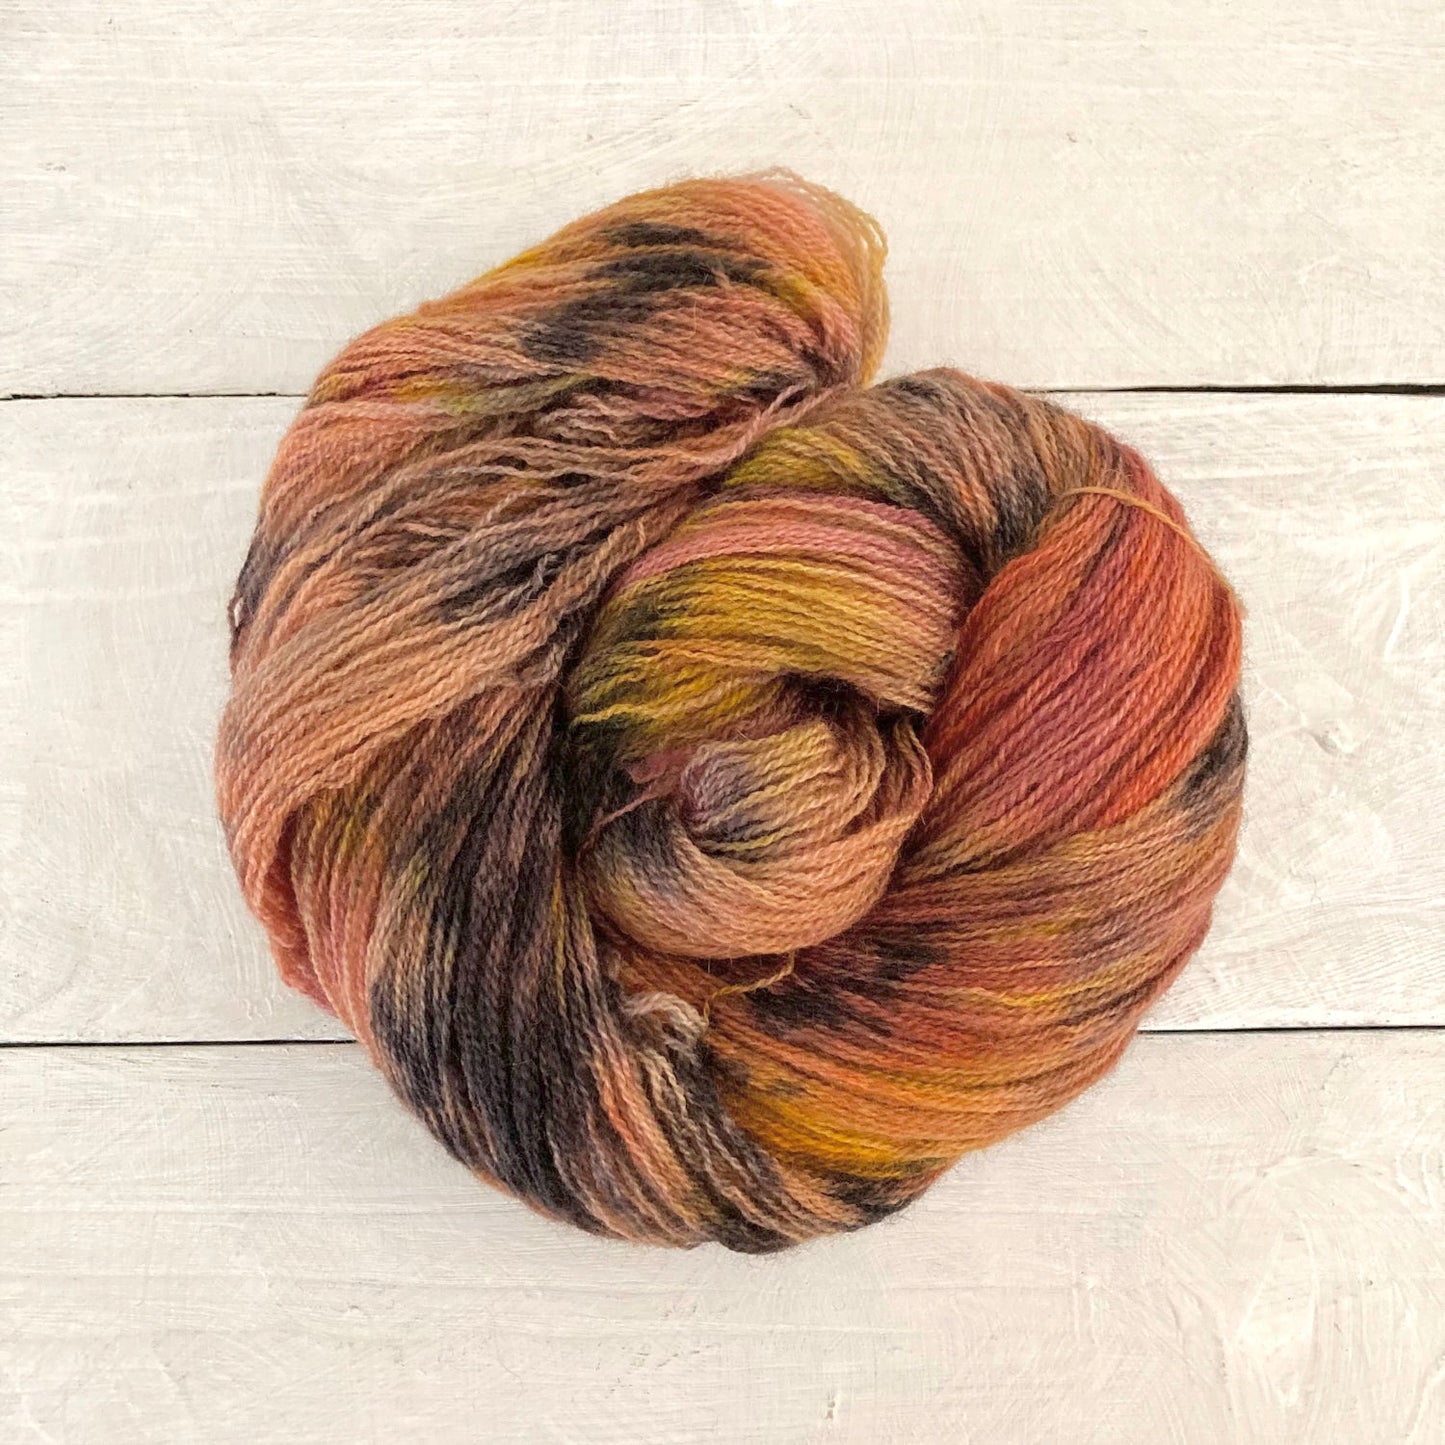 Hand-dyed yarn No.237 BFL lace "Dance of the Knights"